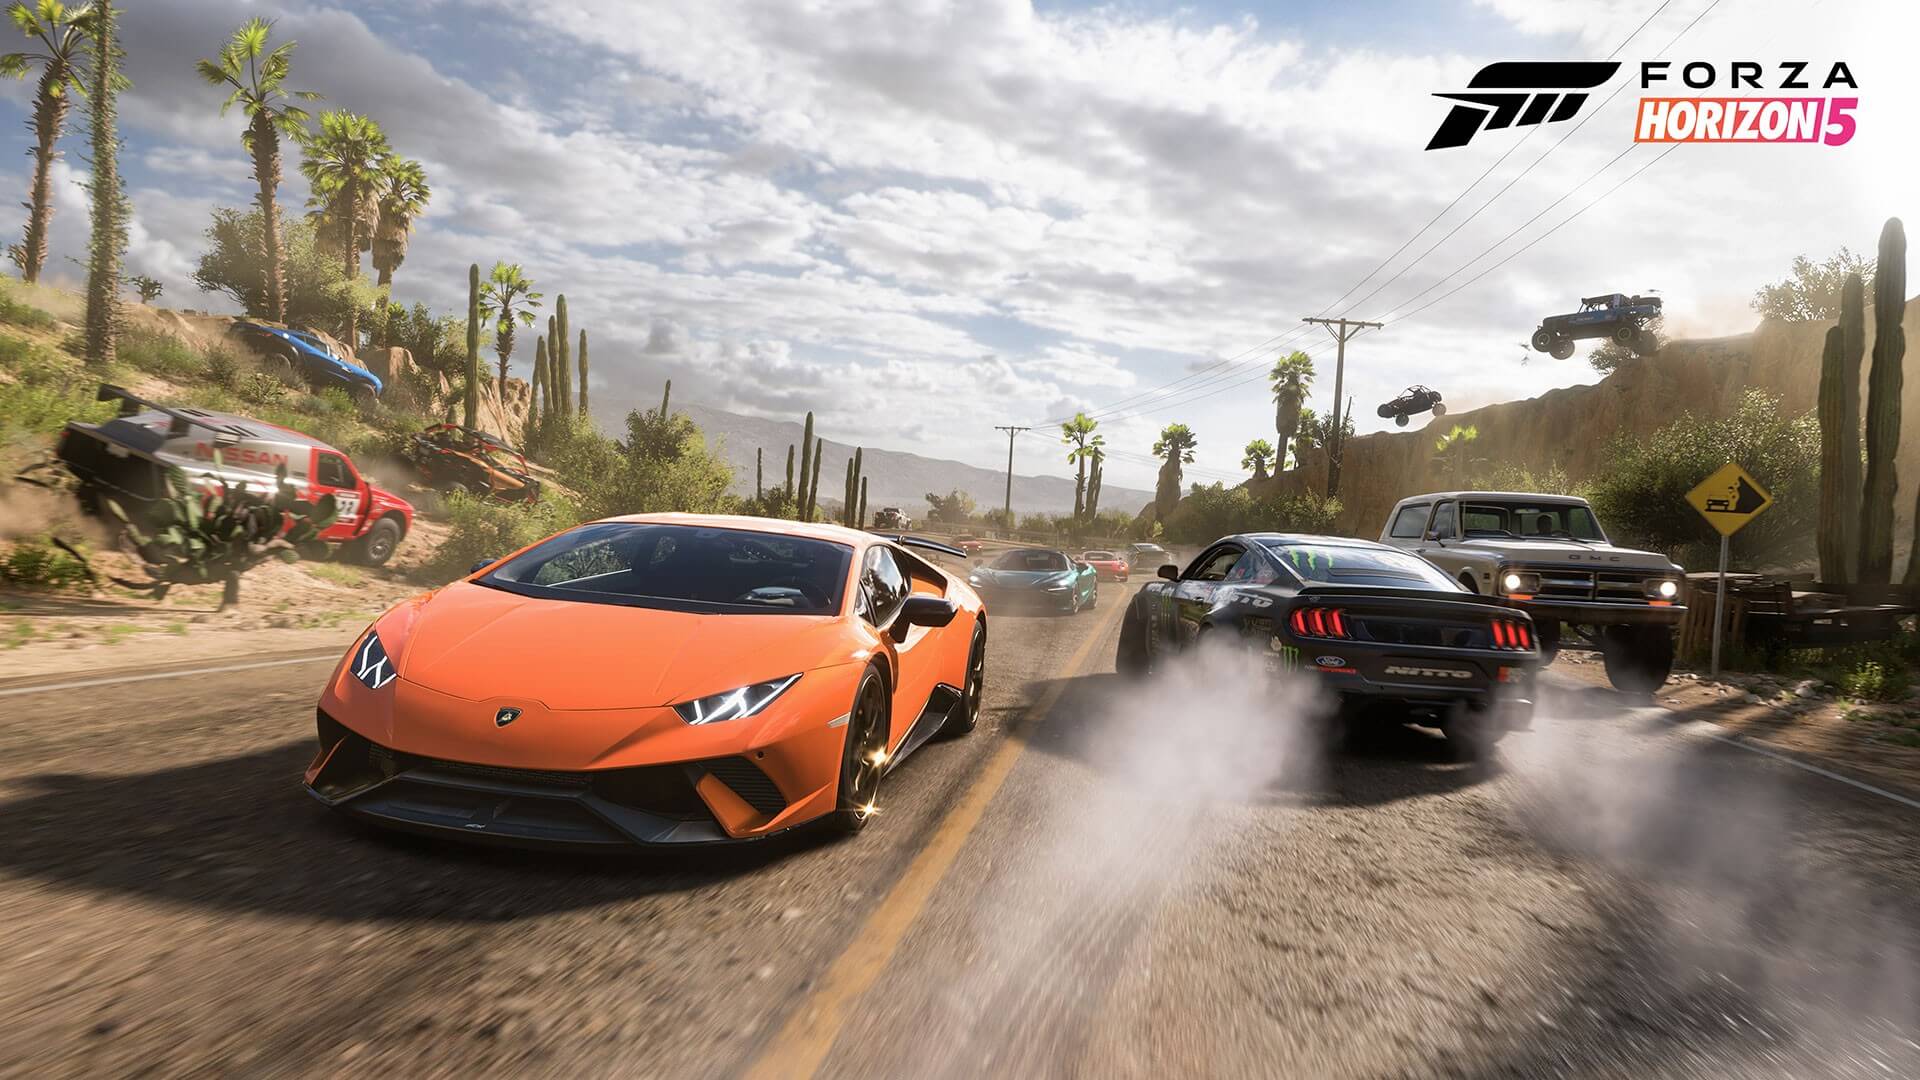 Forza Horizon 5 levels up: New speed record without the use of mods